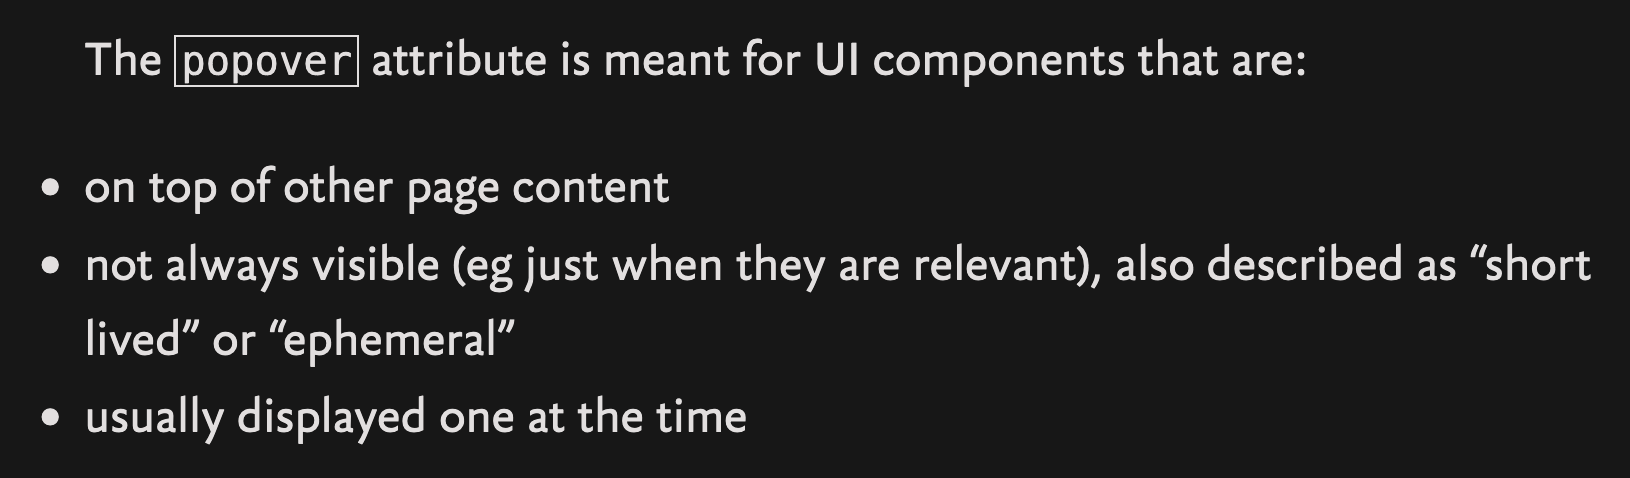 The popover attribute is meant for UI components that are: - on top of other page content - not always visible (eg just when they are relevant), also described as “short lived” or “ephemeral” - usually displayed one at the time